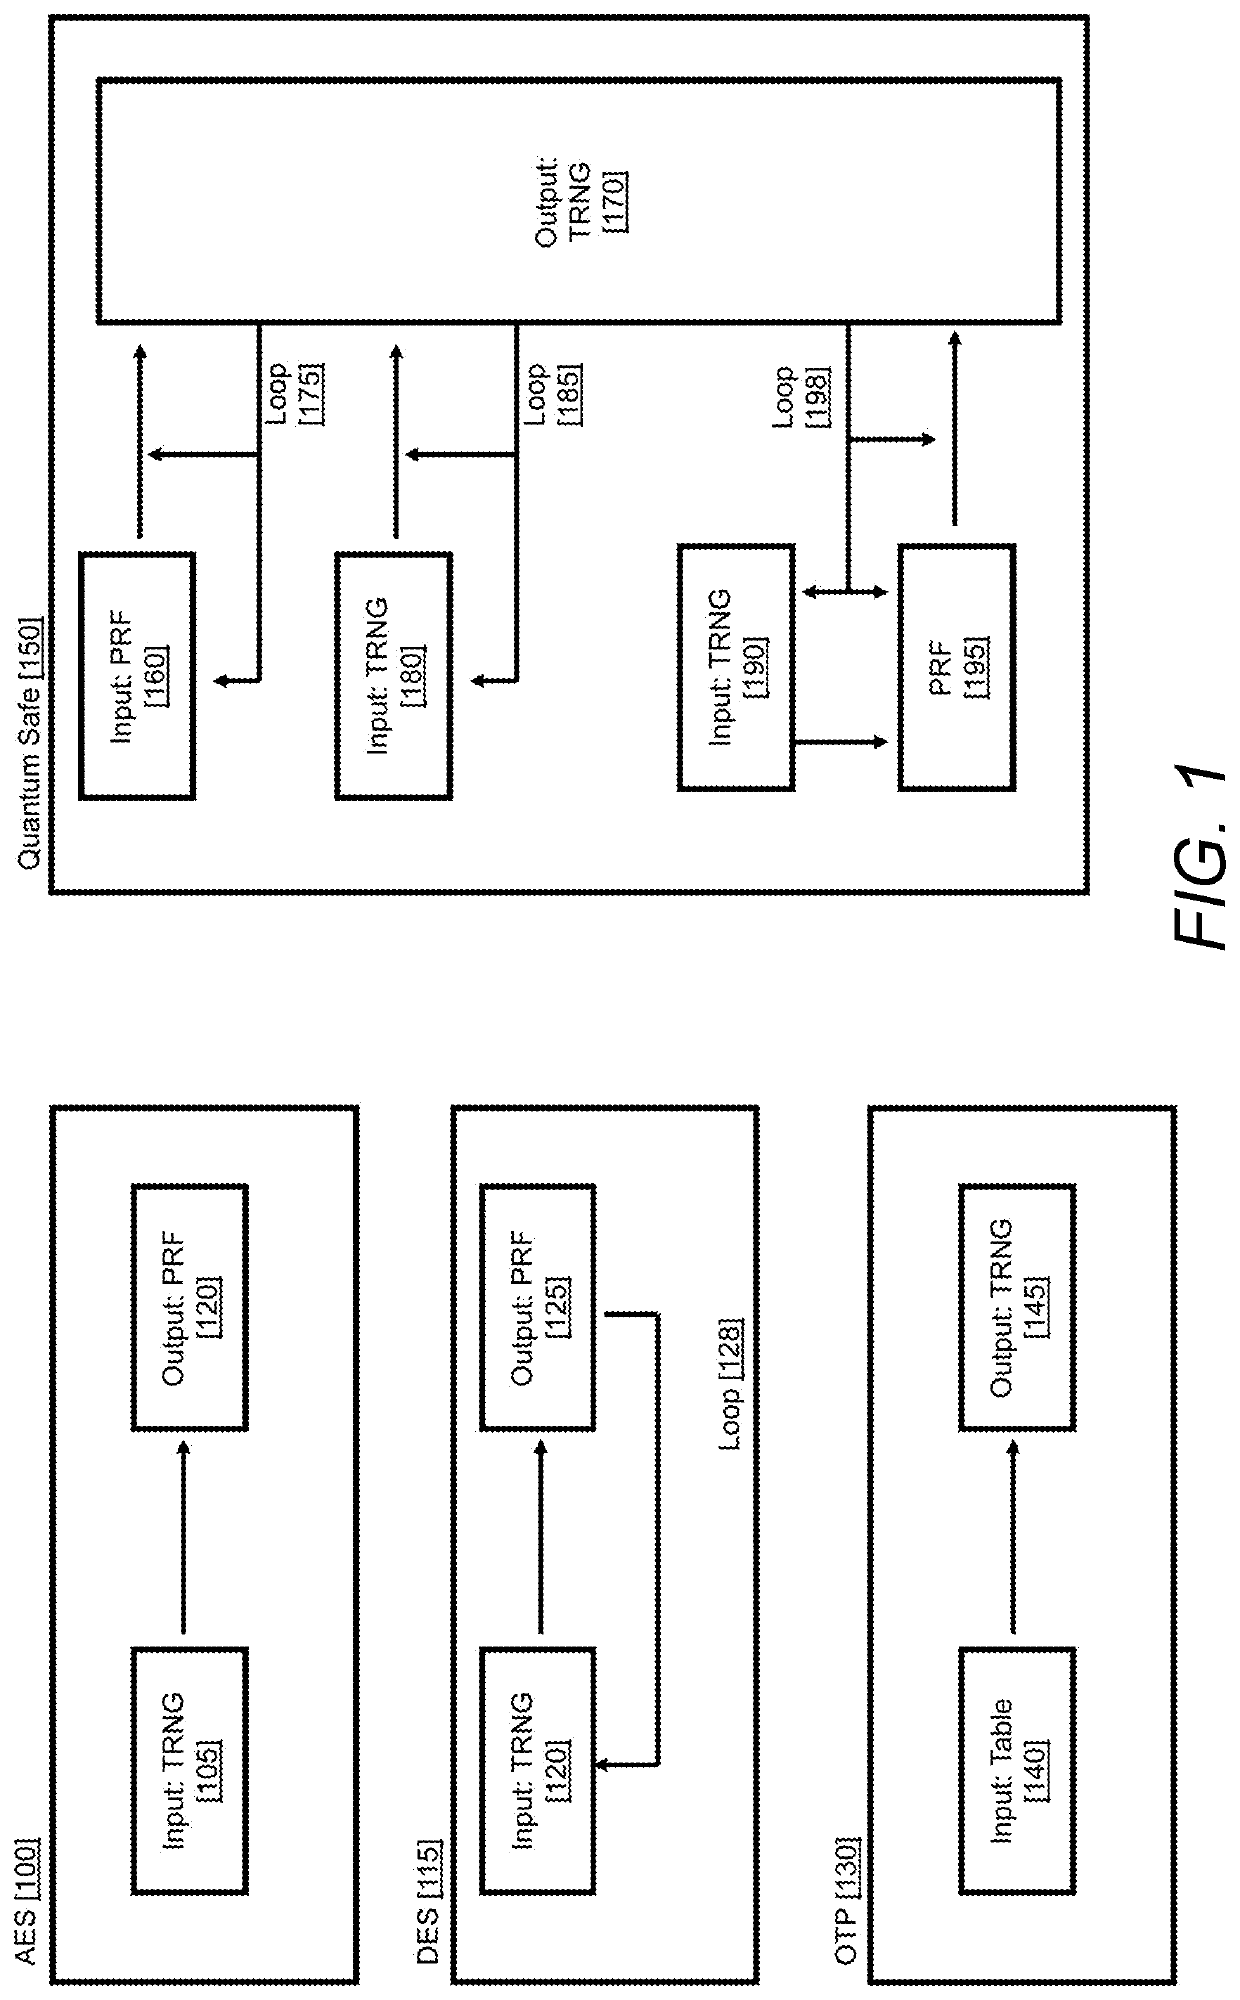 A system and method for quantum-safe authentication, encryption, and decryption of information